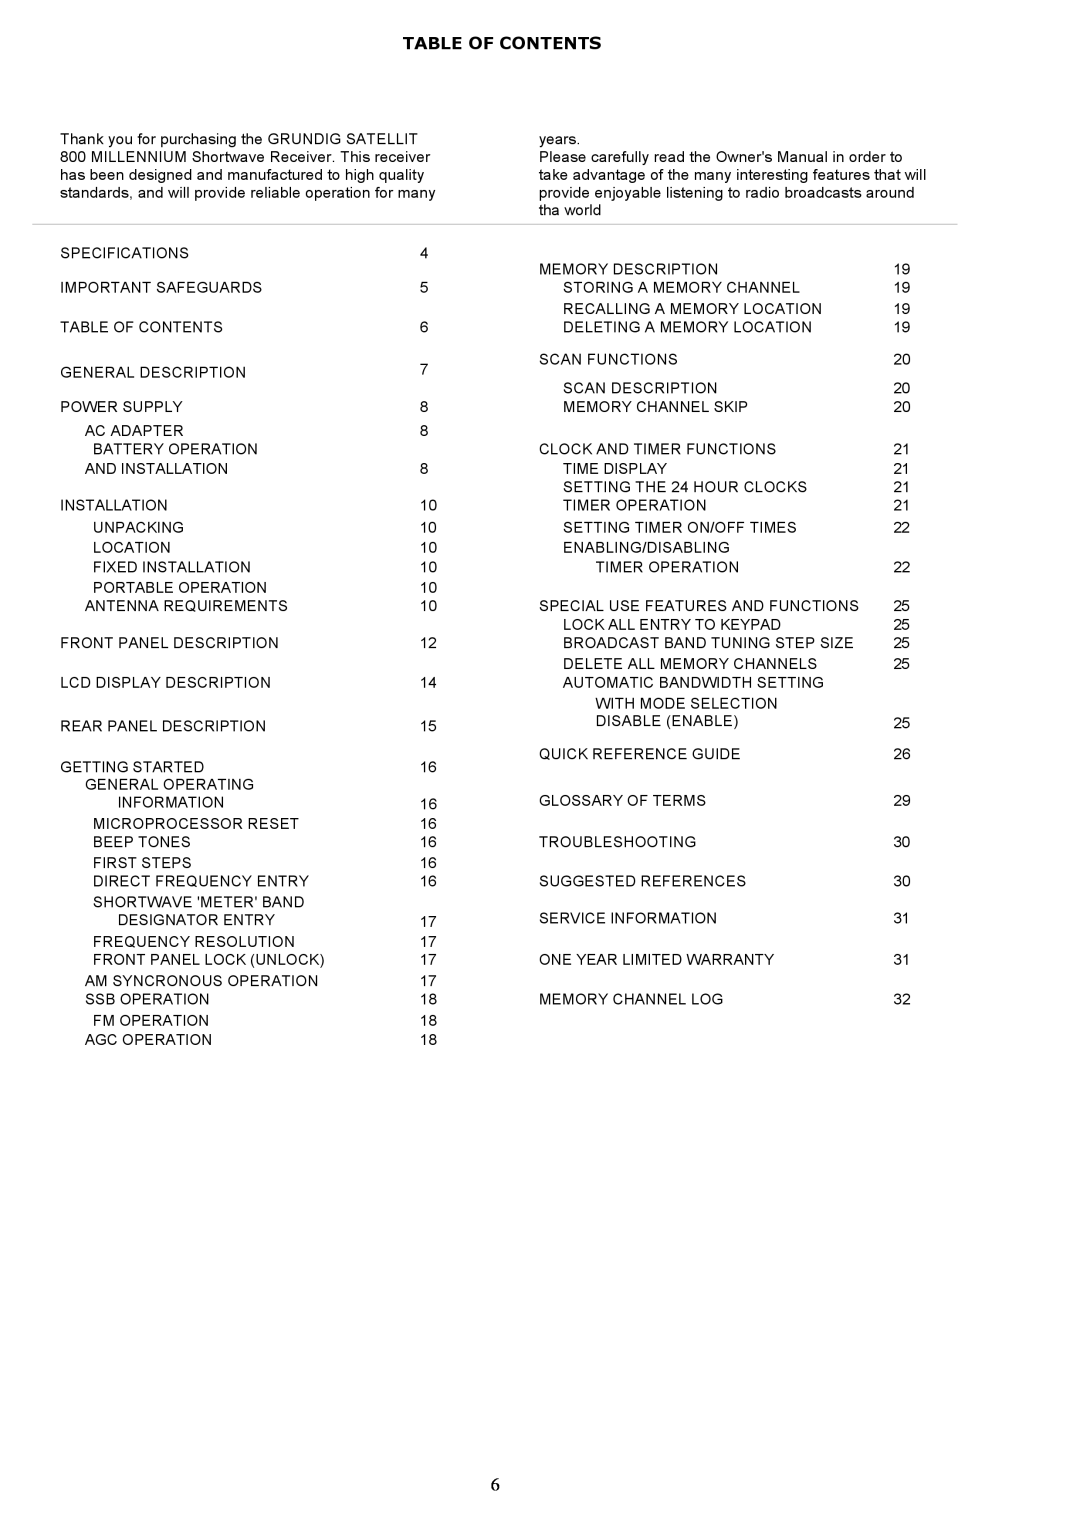 Grundig 800 MILLENNIUM manual Table Of Contents 